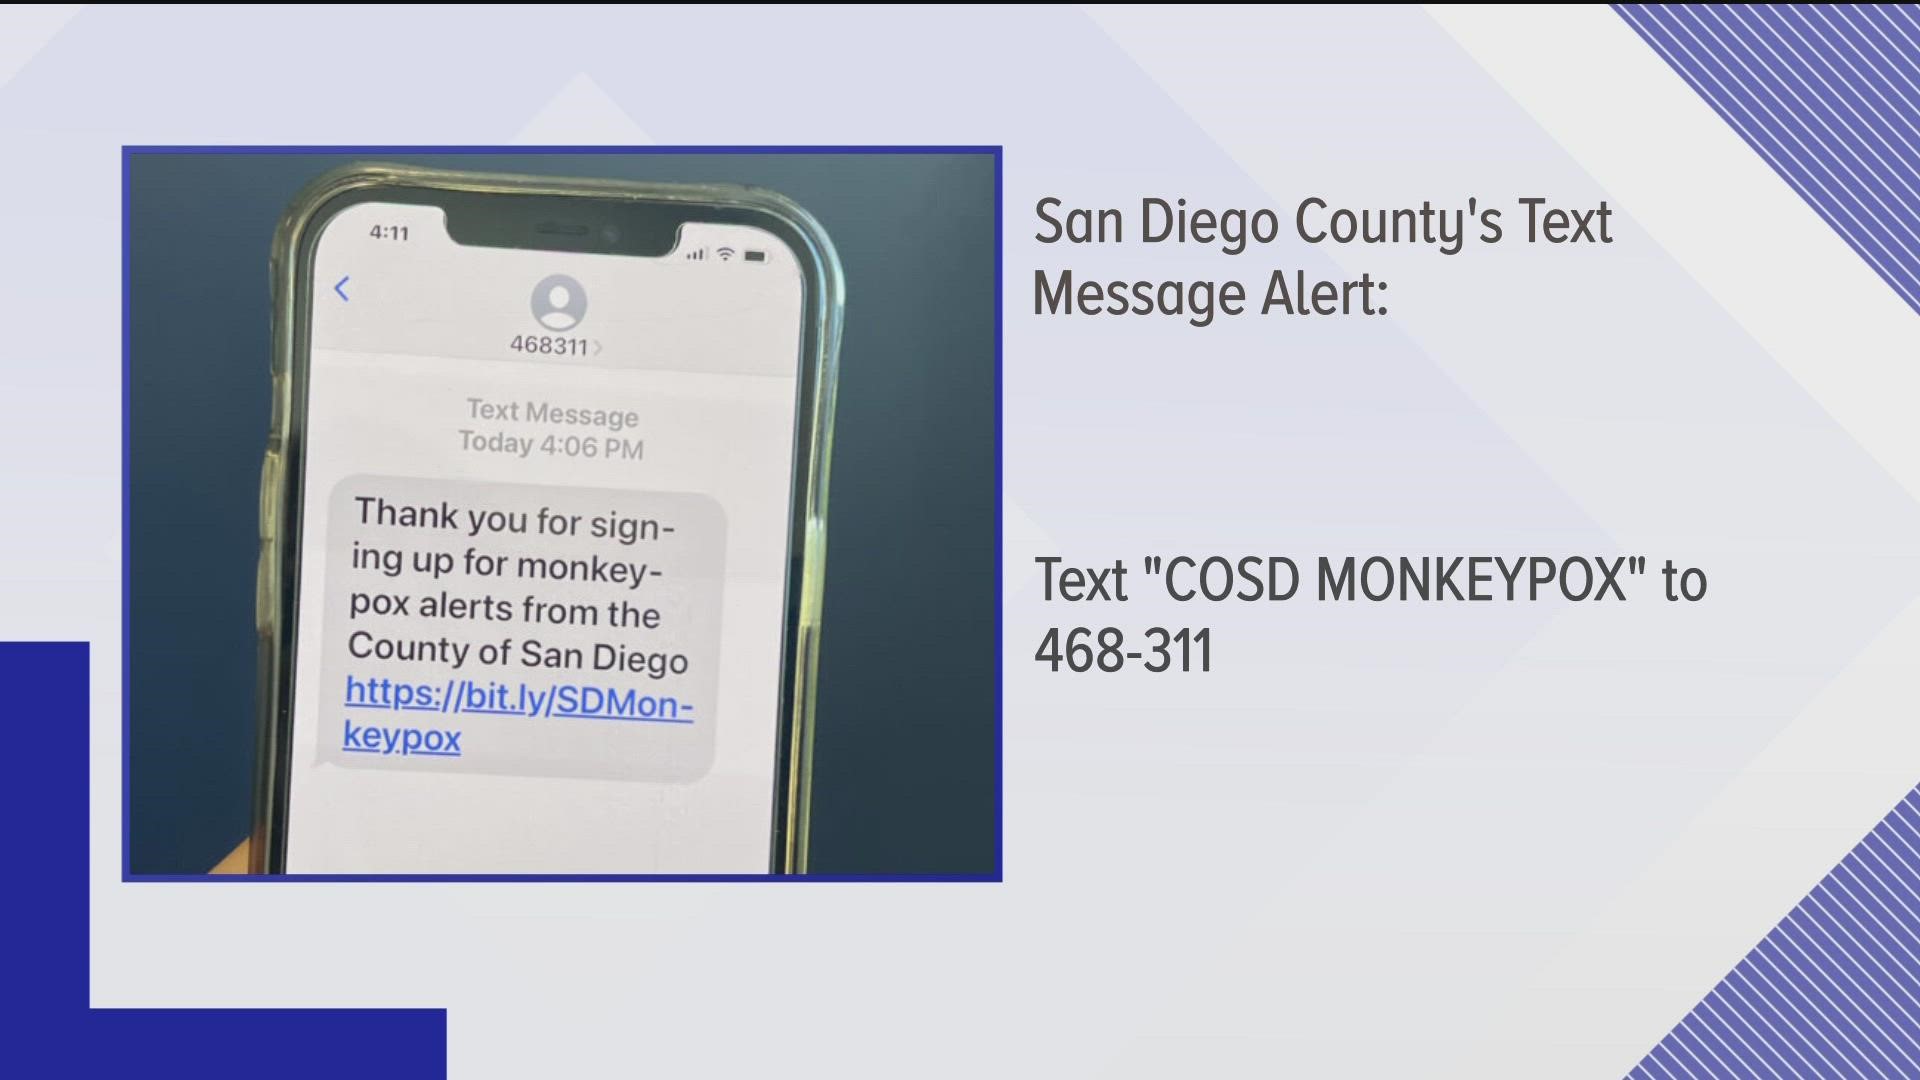 To sign up to receive the messages, text COSD MONKEYPOX to 468-311.